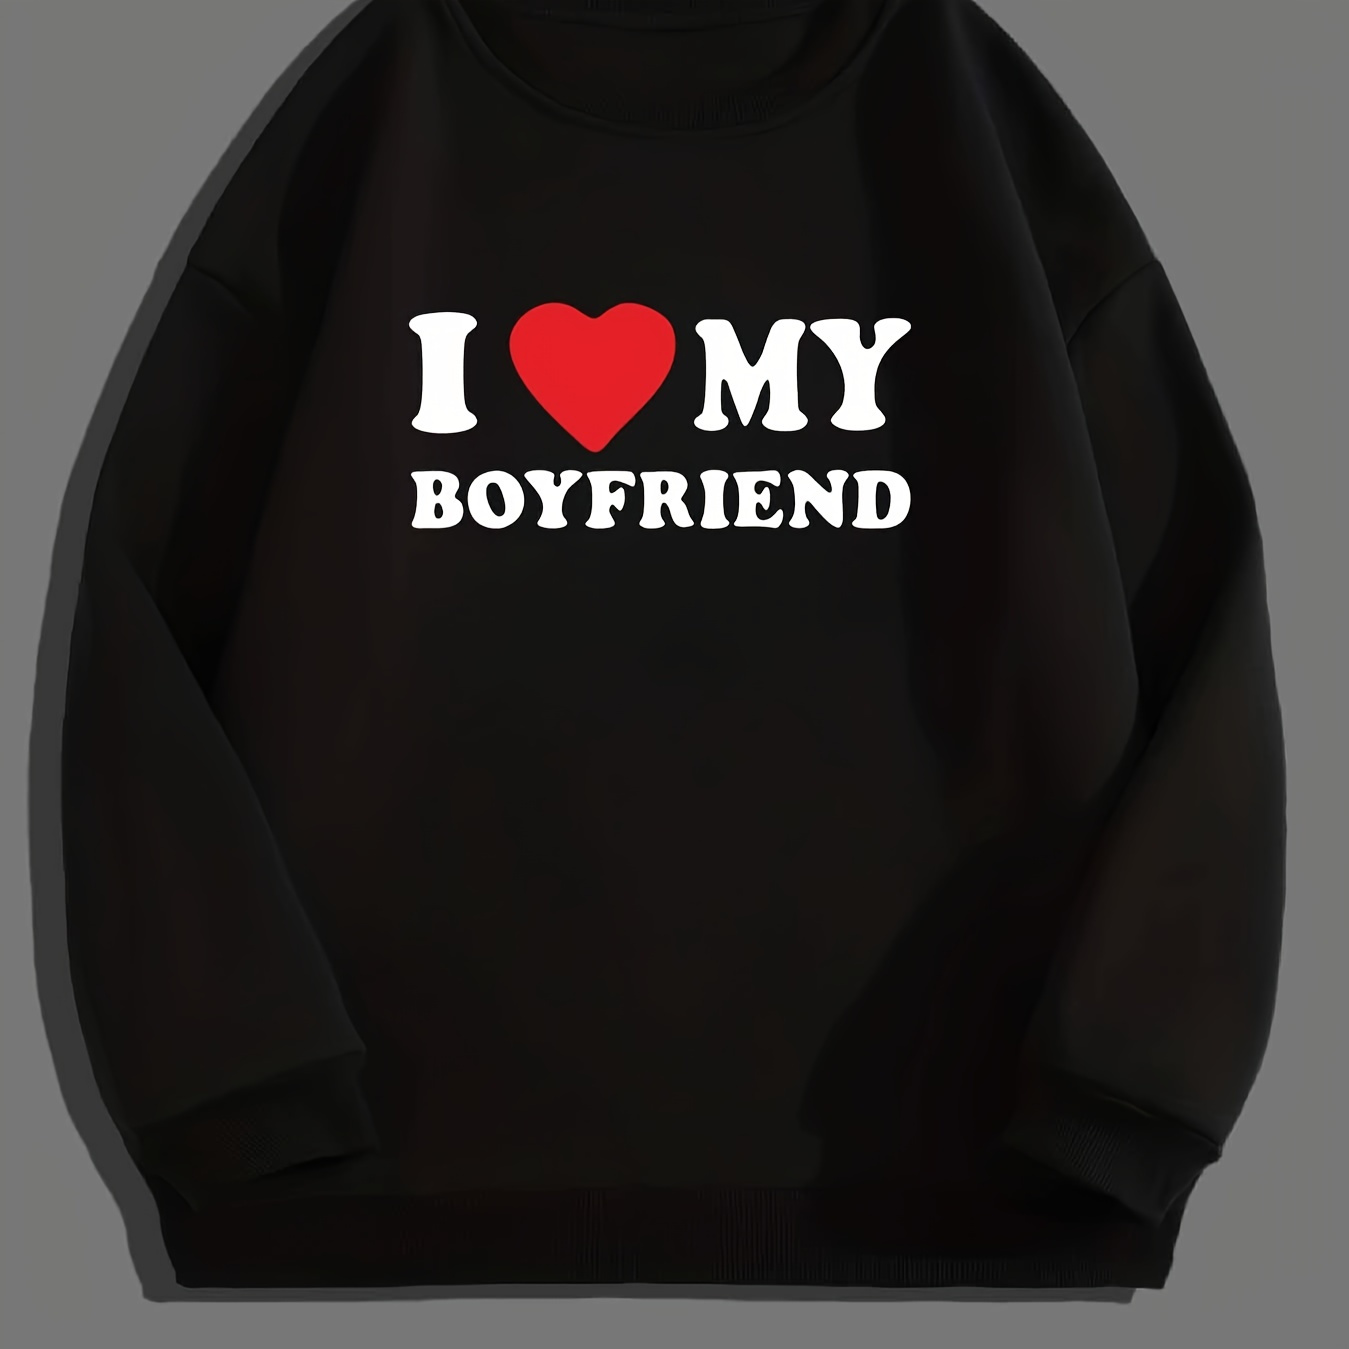 

I Love My Boyfriend Print, Sweatshirt With Long Sleeve, Men's Creative Slightly Flex Crew Neck Pullover For Spring Fall And Winter